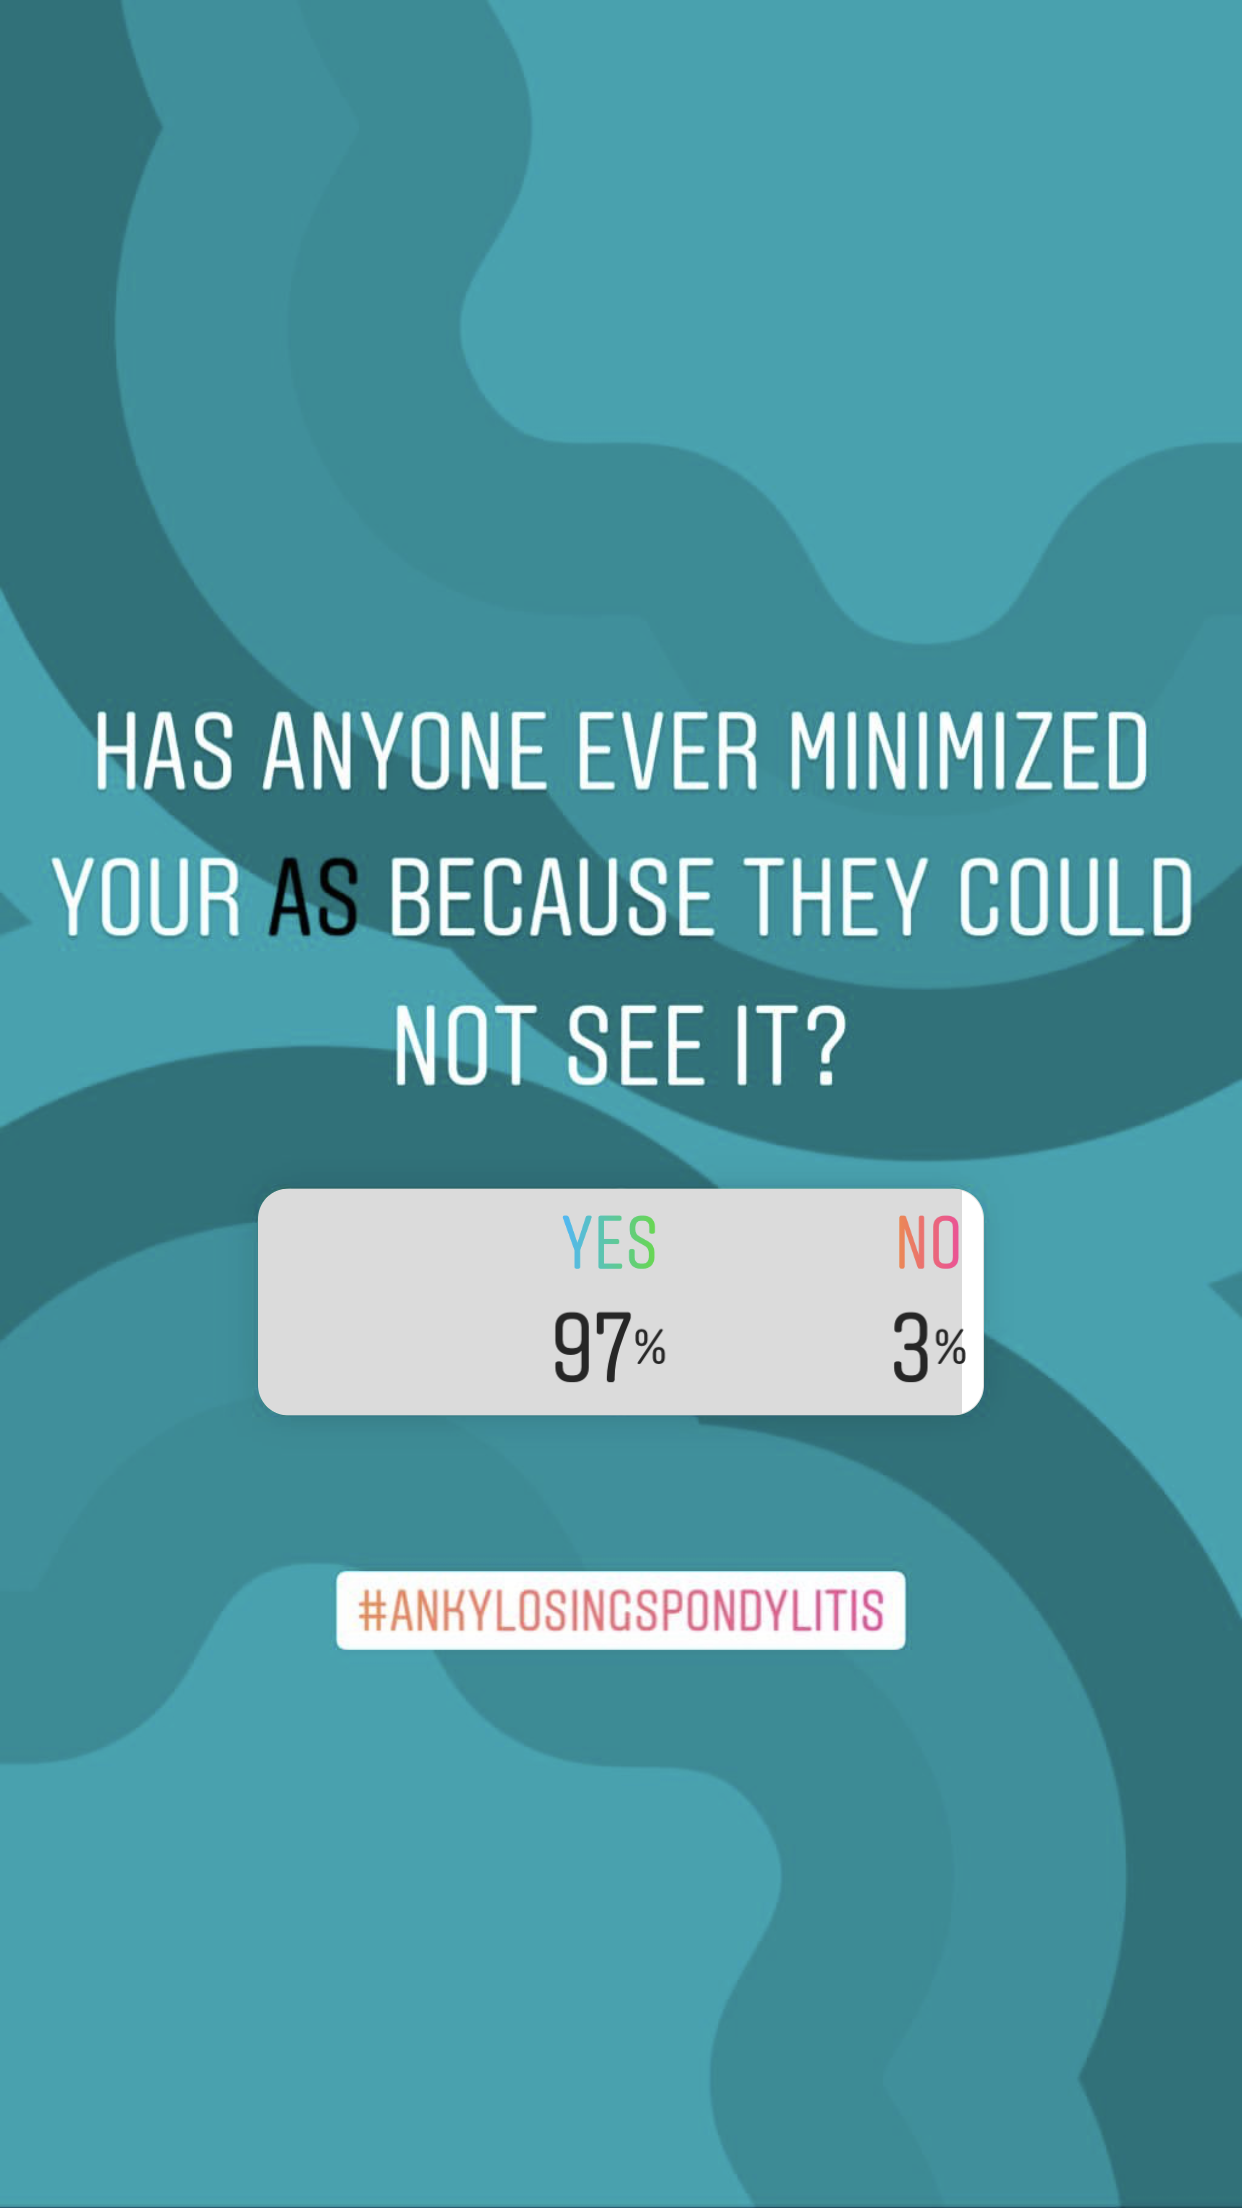 97 percent of people say that people have minimized their AS because they can not see it